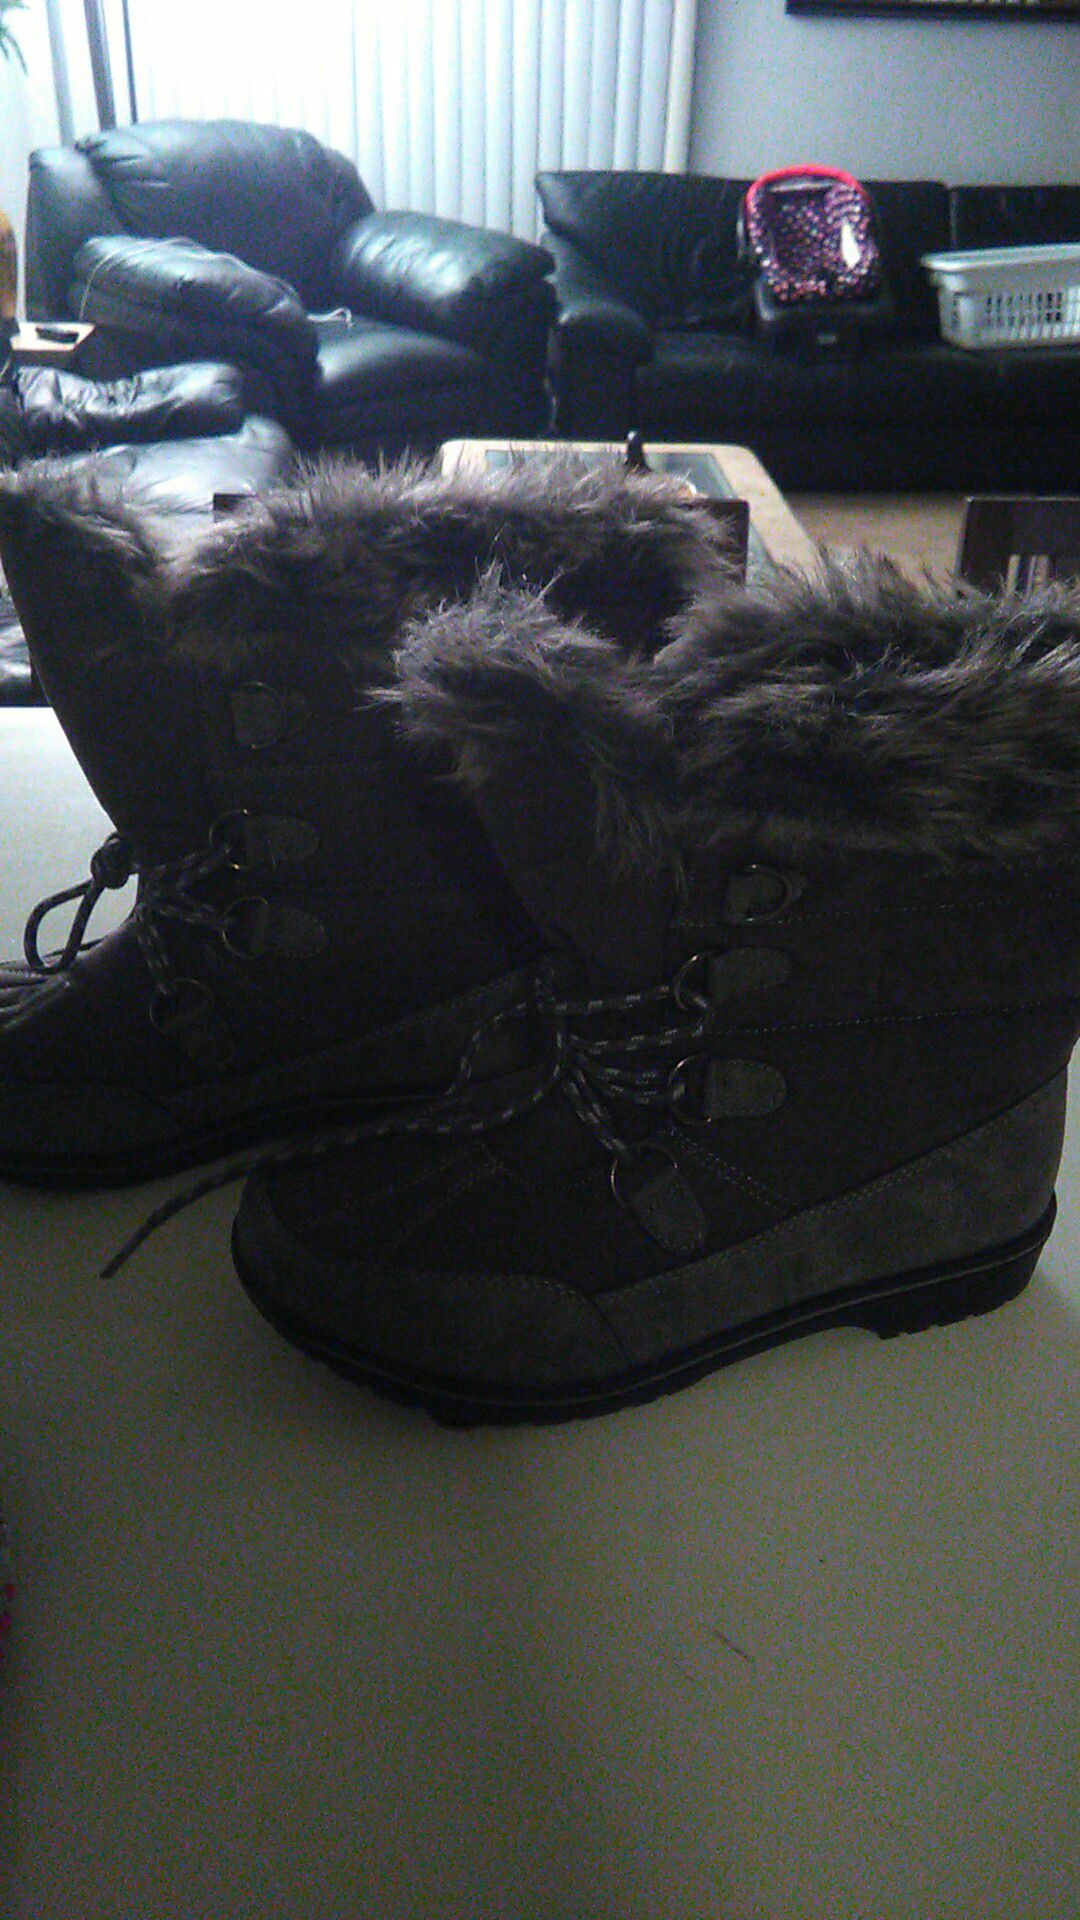 Women's snow boots size 10 in like brand new condition